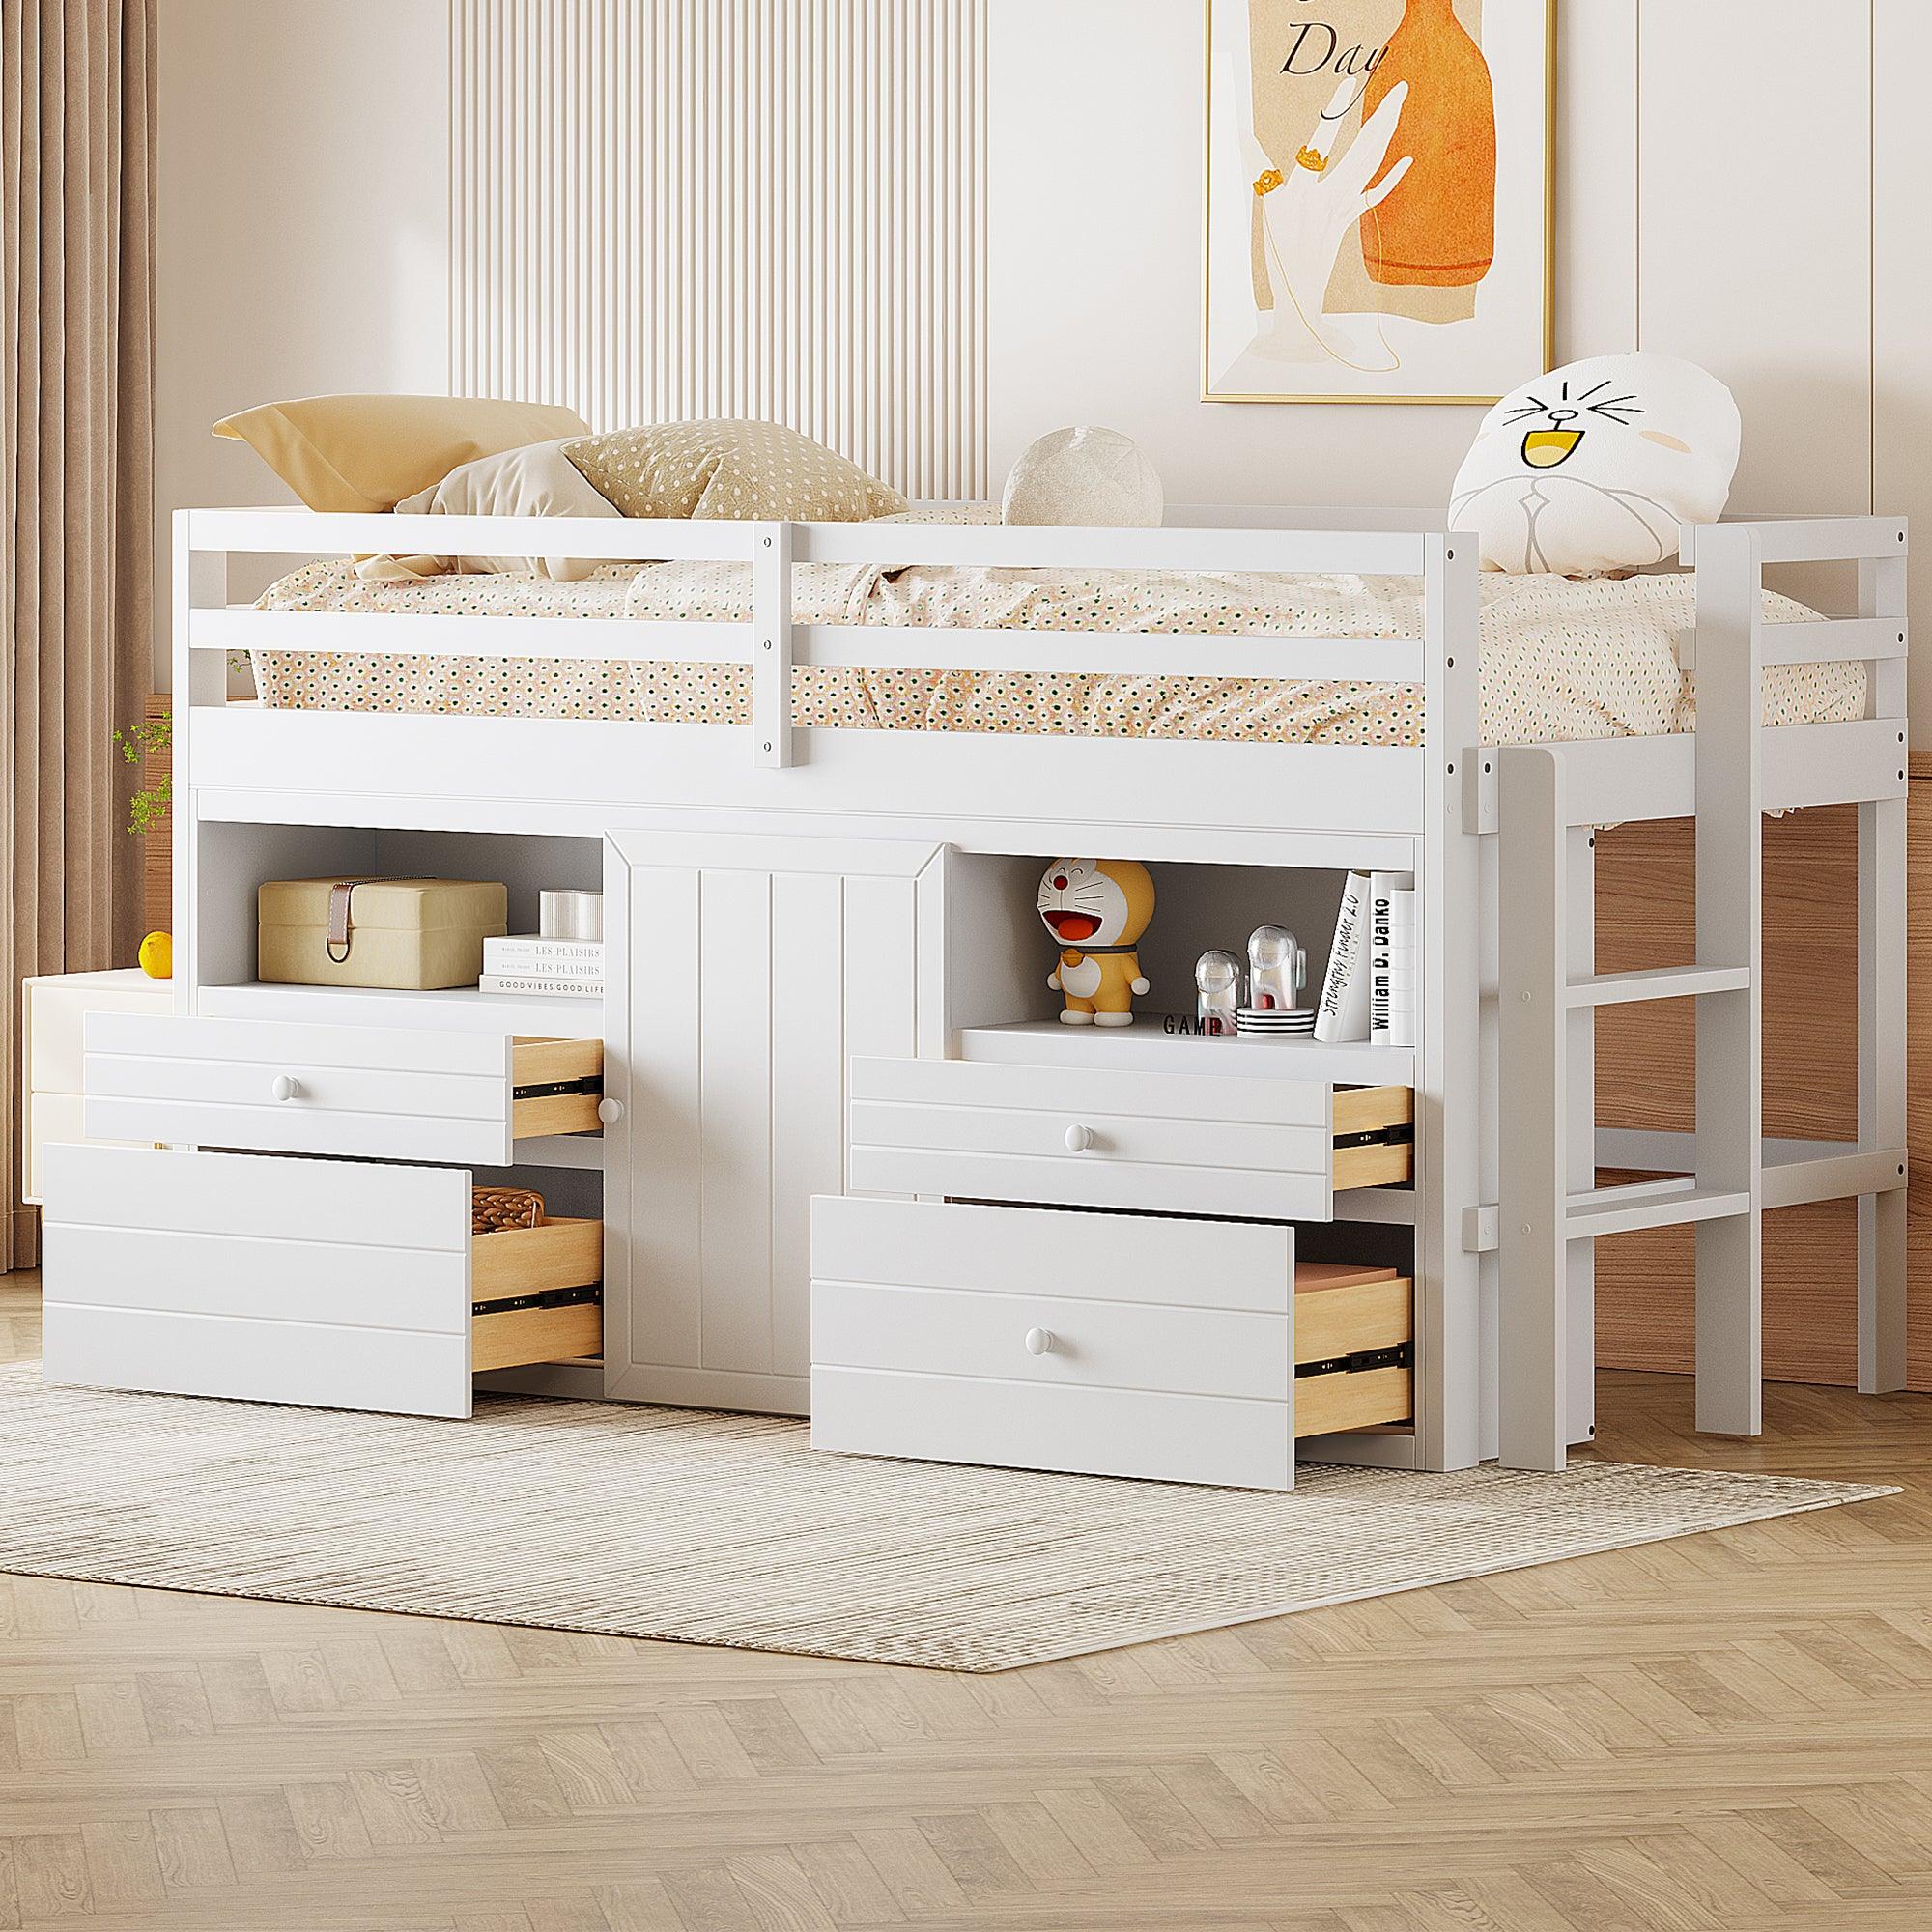 🆓🚛 Twin Size Loft Bed With 4 Drawers, Underneath Cabinet & Shelves, White